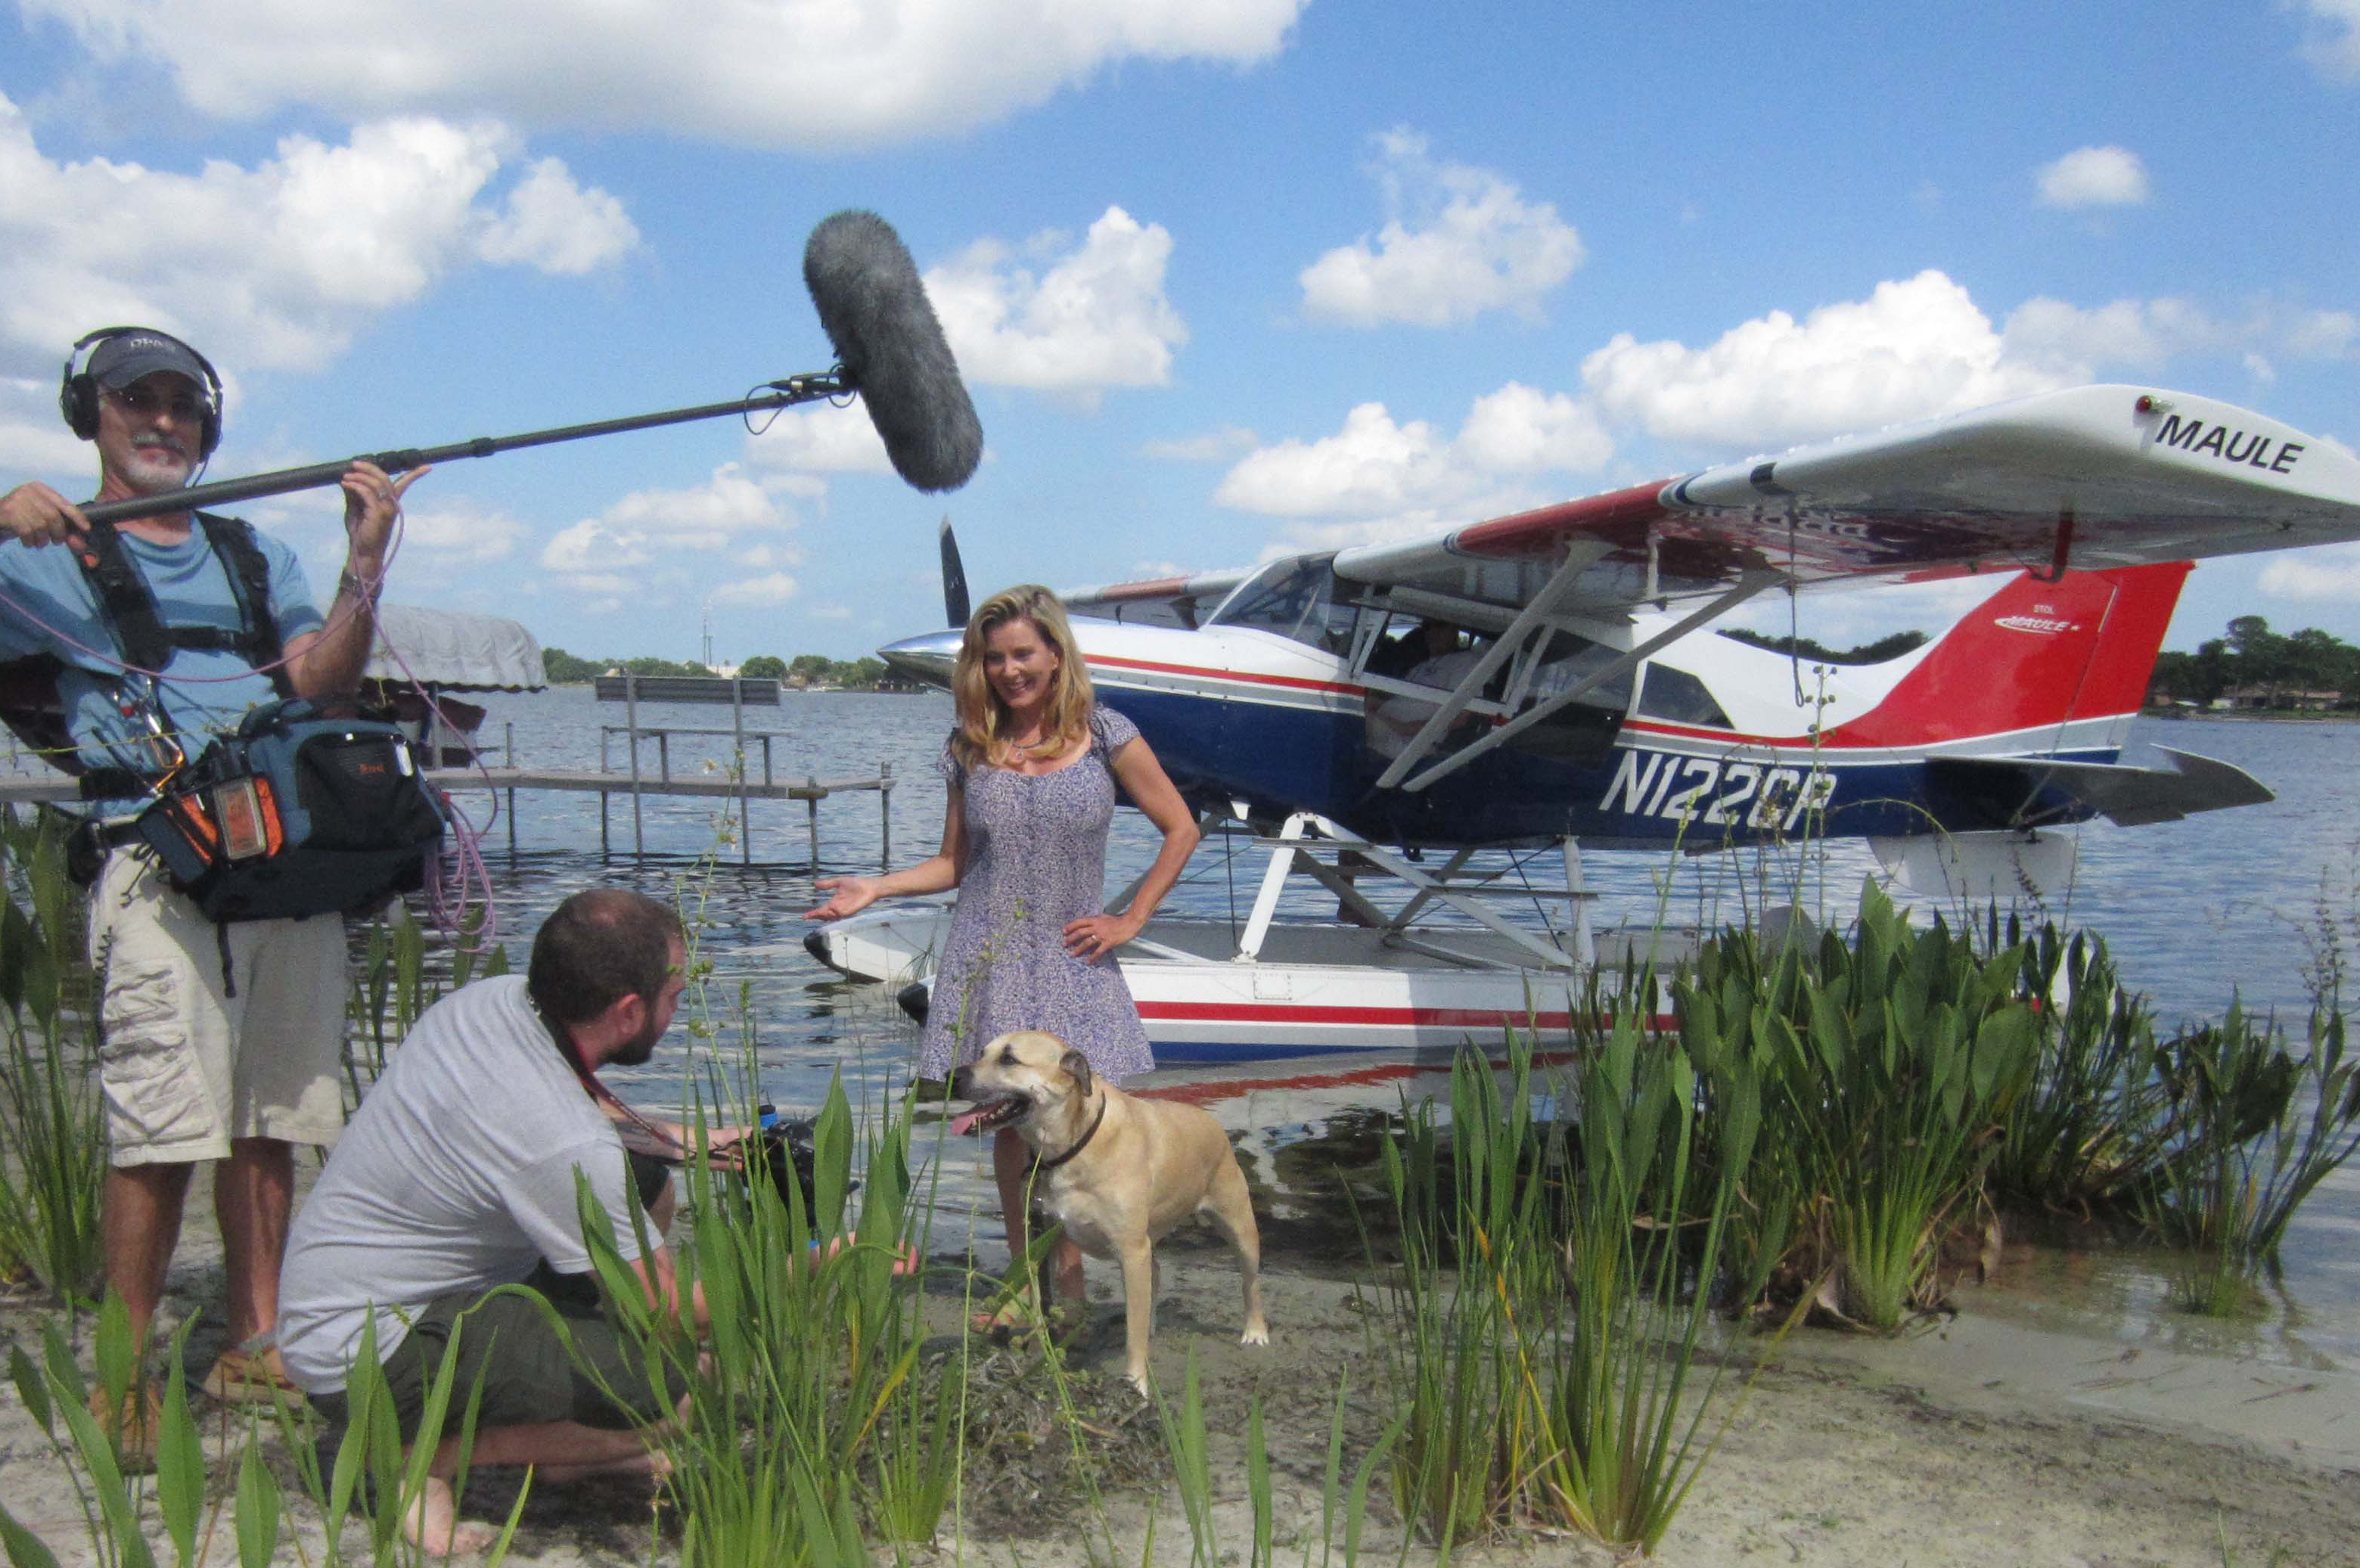 Super Smiley shooting the television pilot, Pets Welcome Here. Smiley is the K9 Adventure Guide on the TV series.